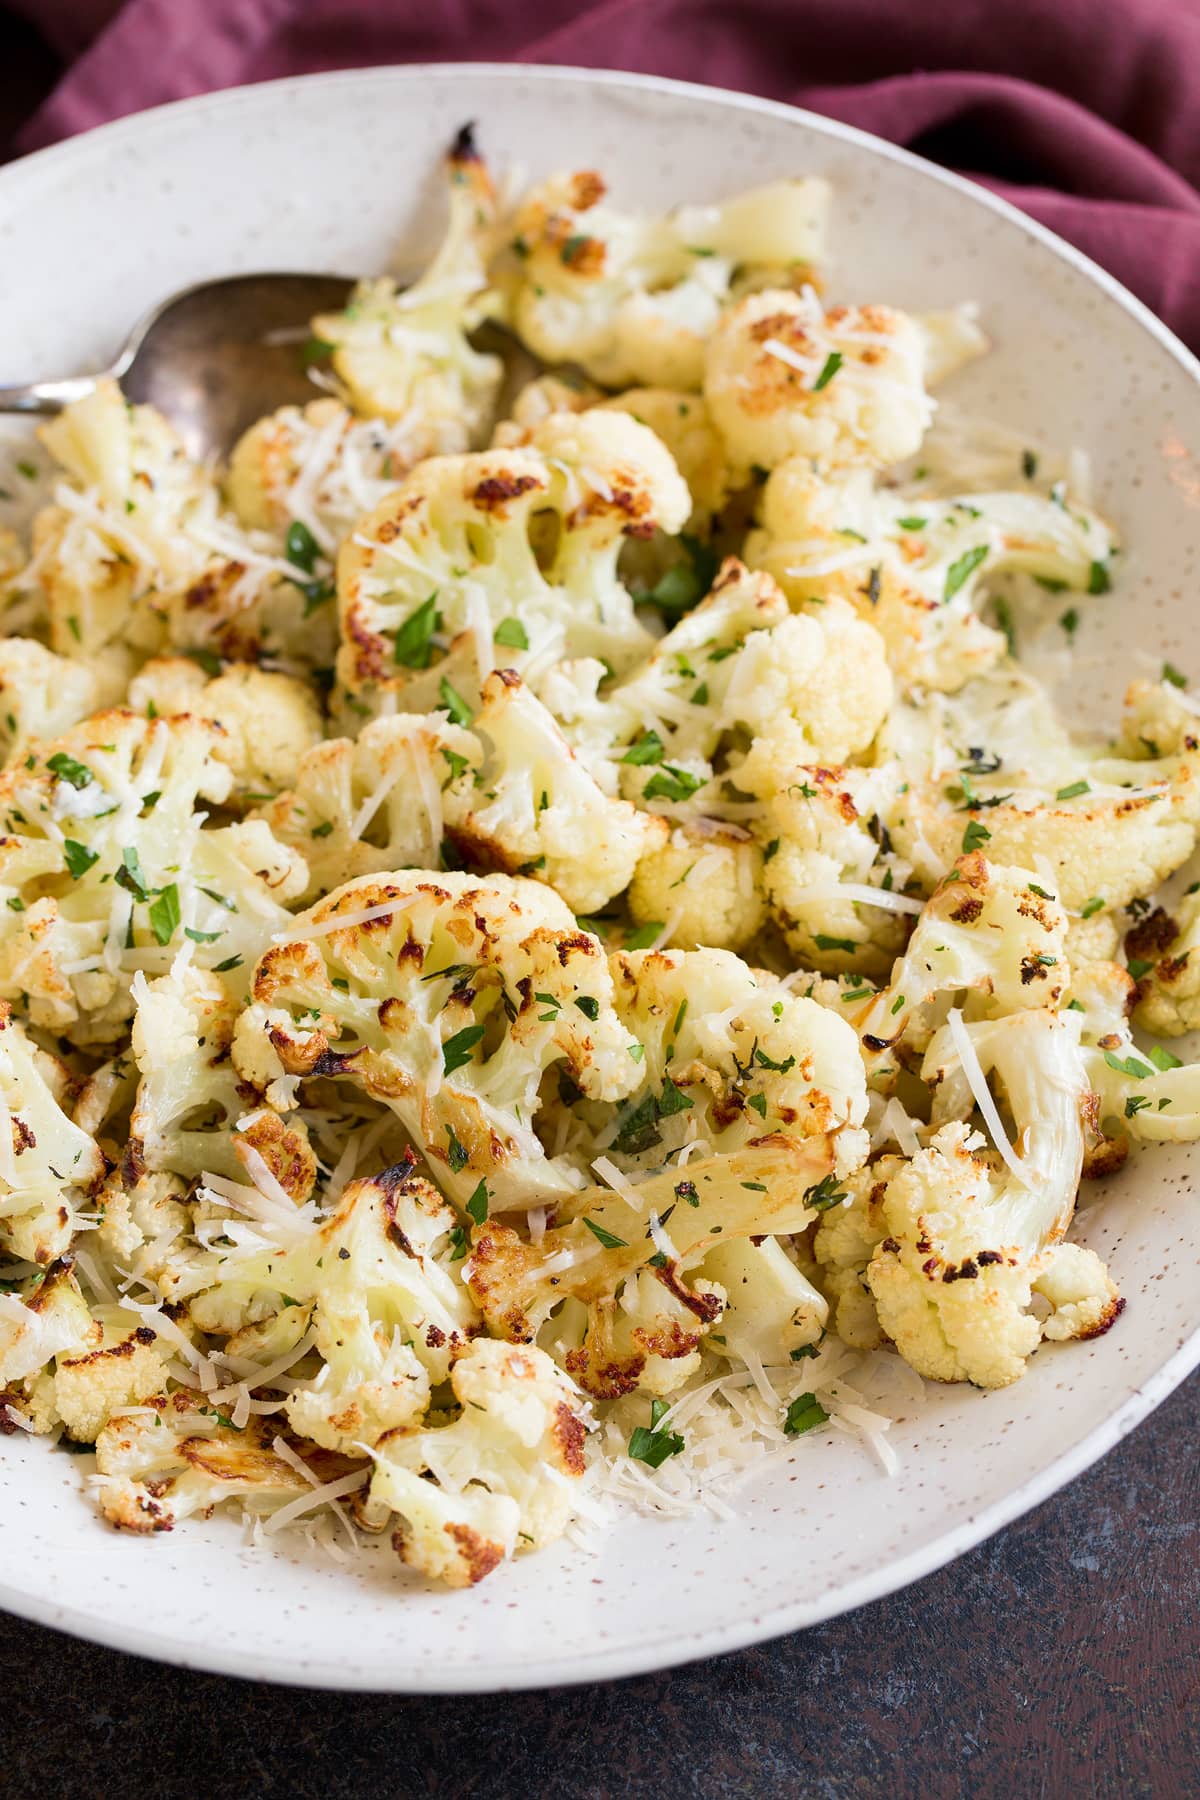 Roasted Cauliflower florets shown with caramelized edges. Served in a white bowl, cauliflower is garnished with herbs, garlic and parmesan.